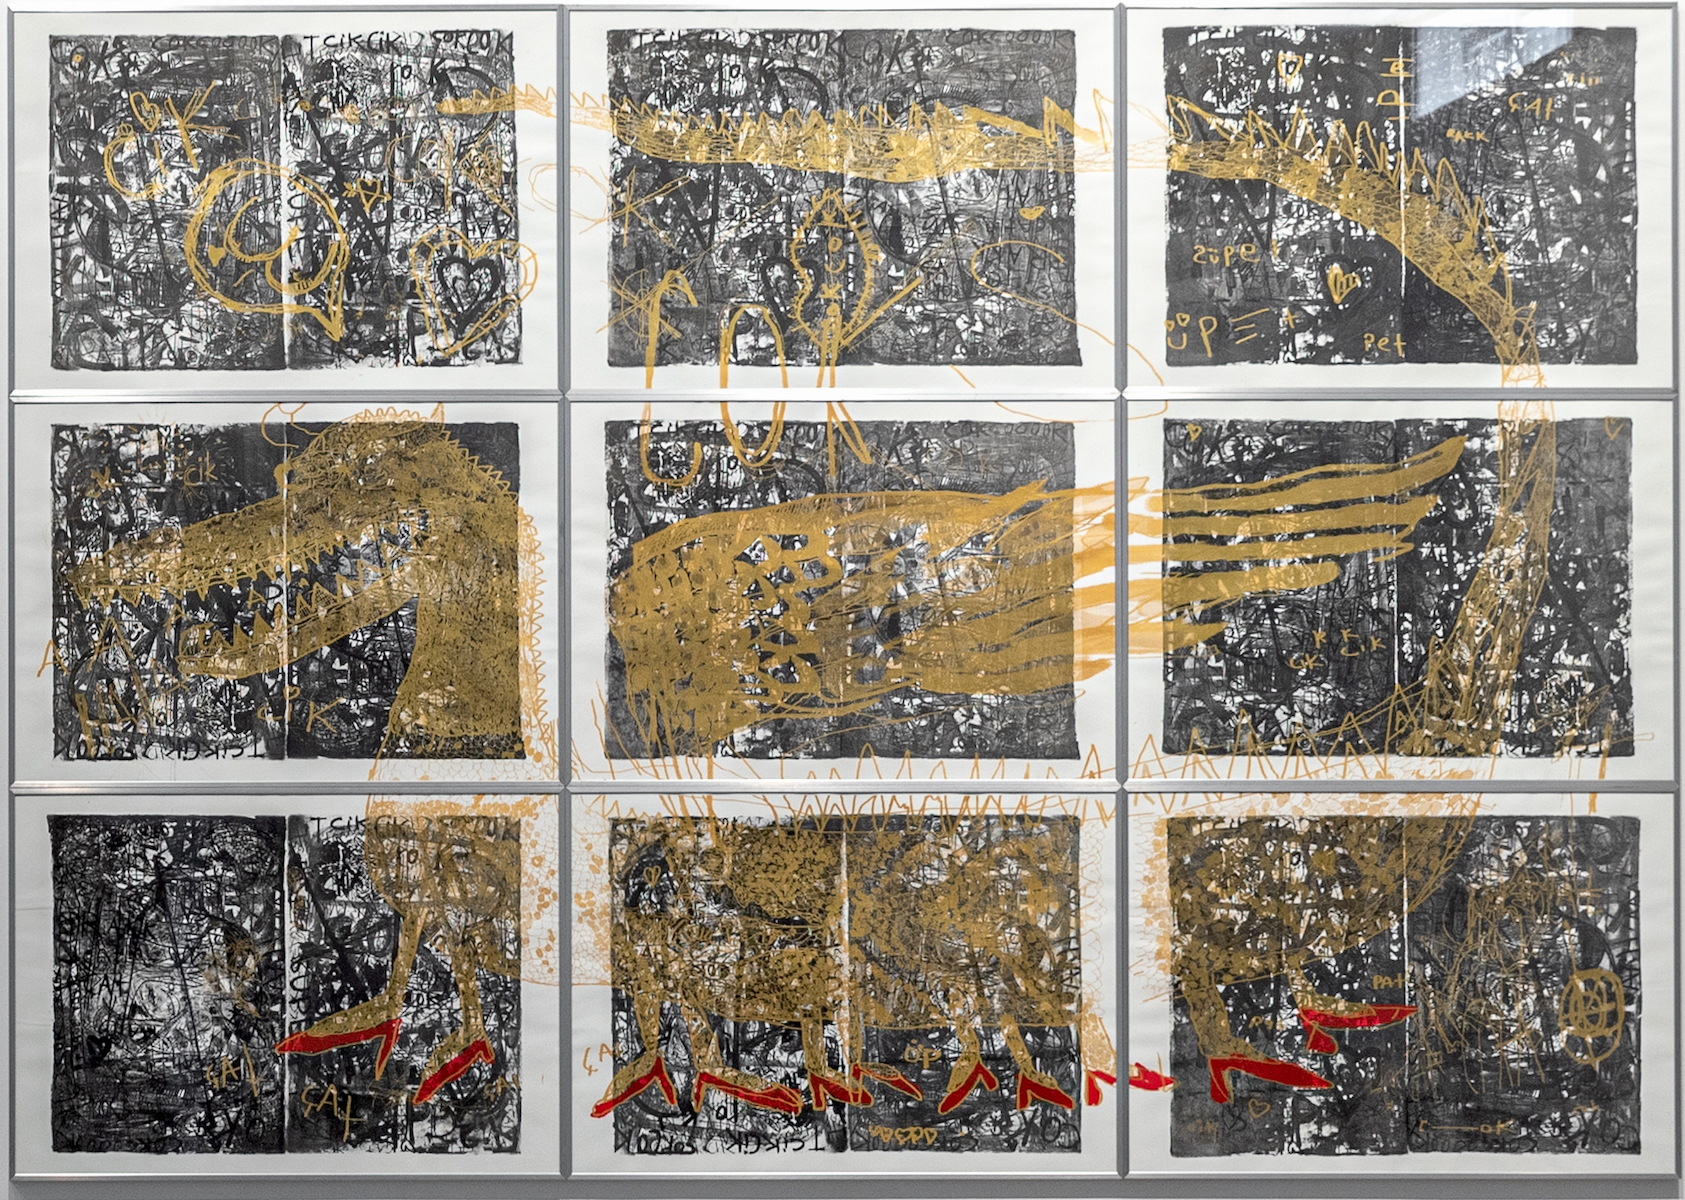 stone lithography and silkscreen print on paper, cm 210x300 (9 parts each 70x100 cm)